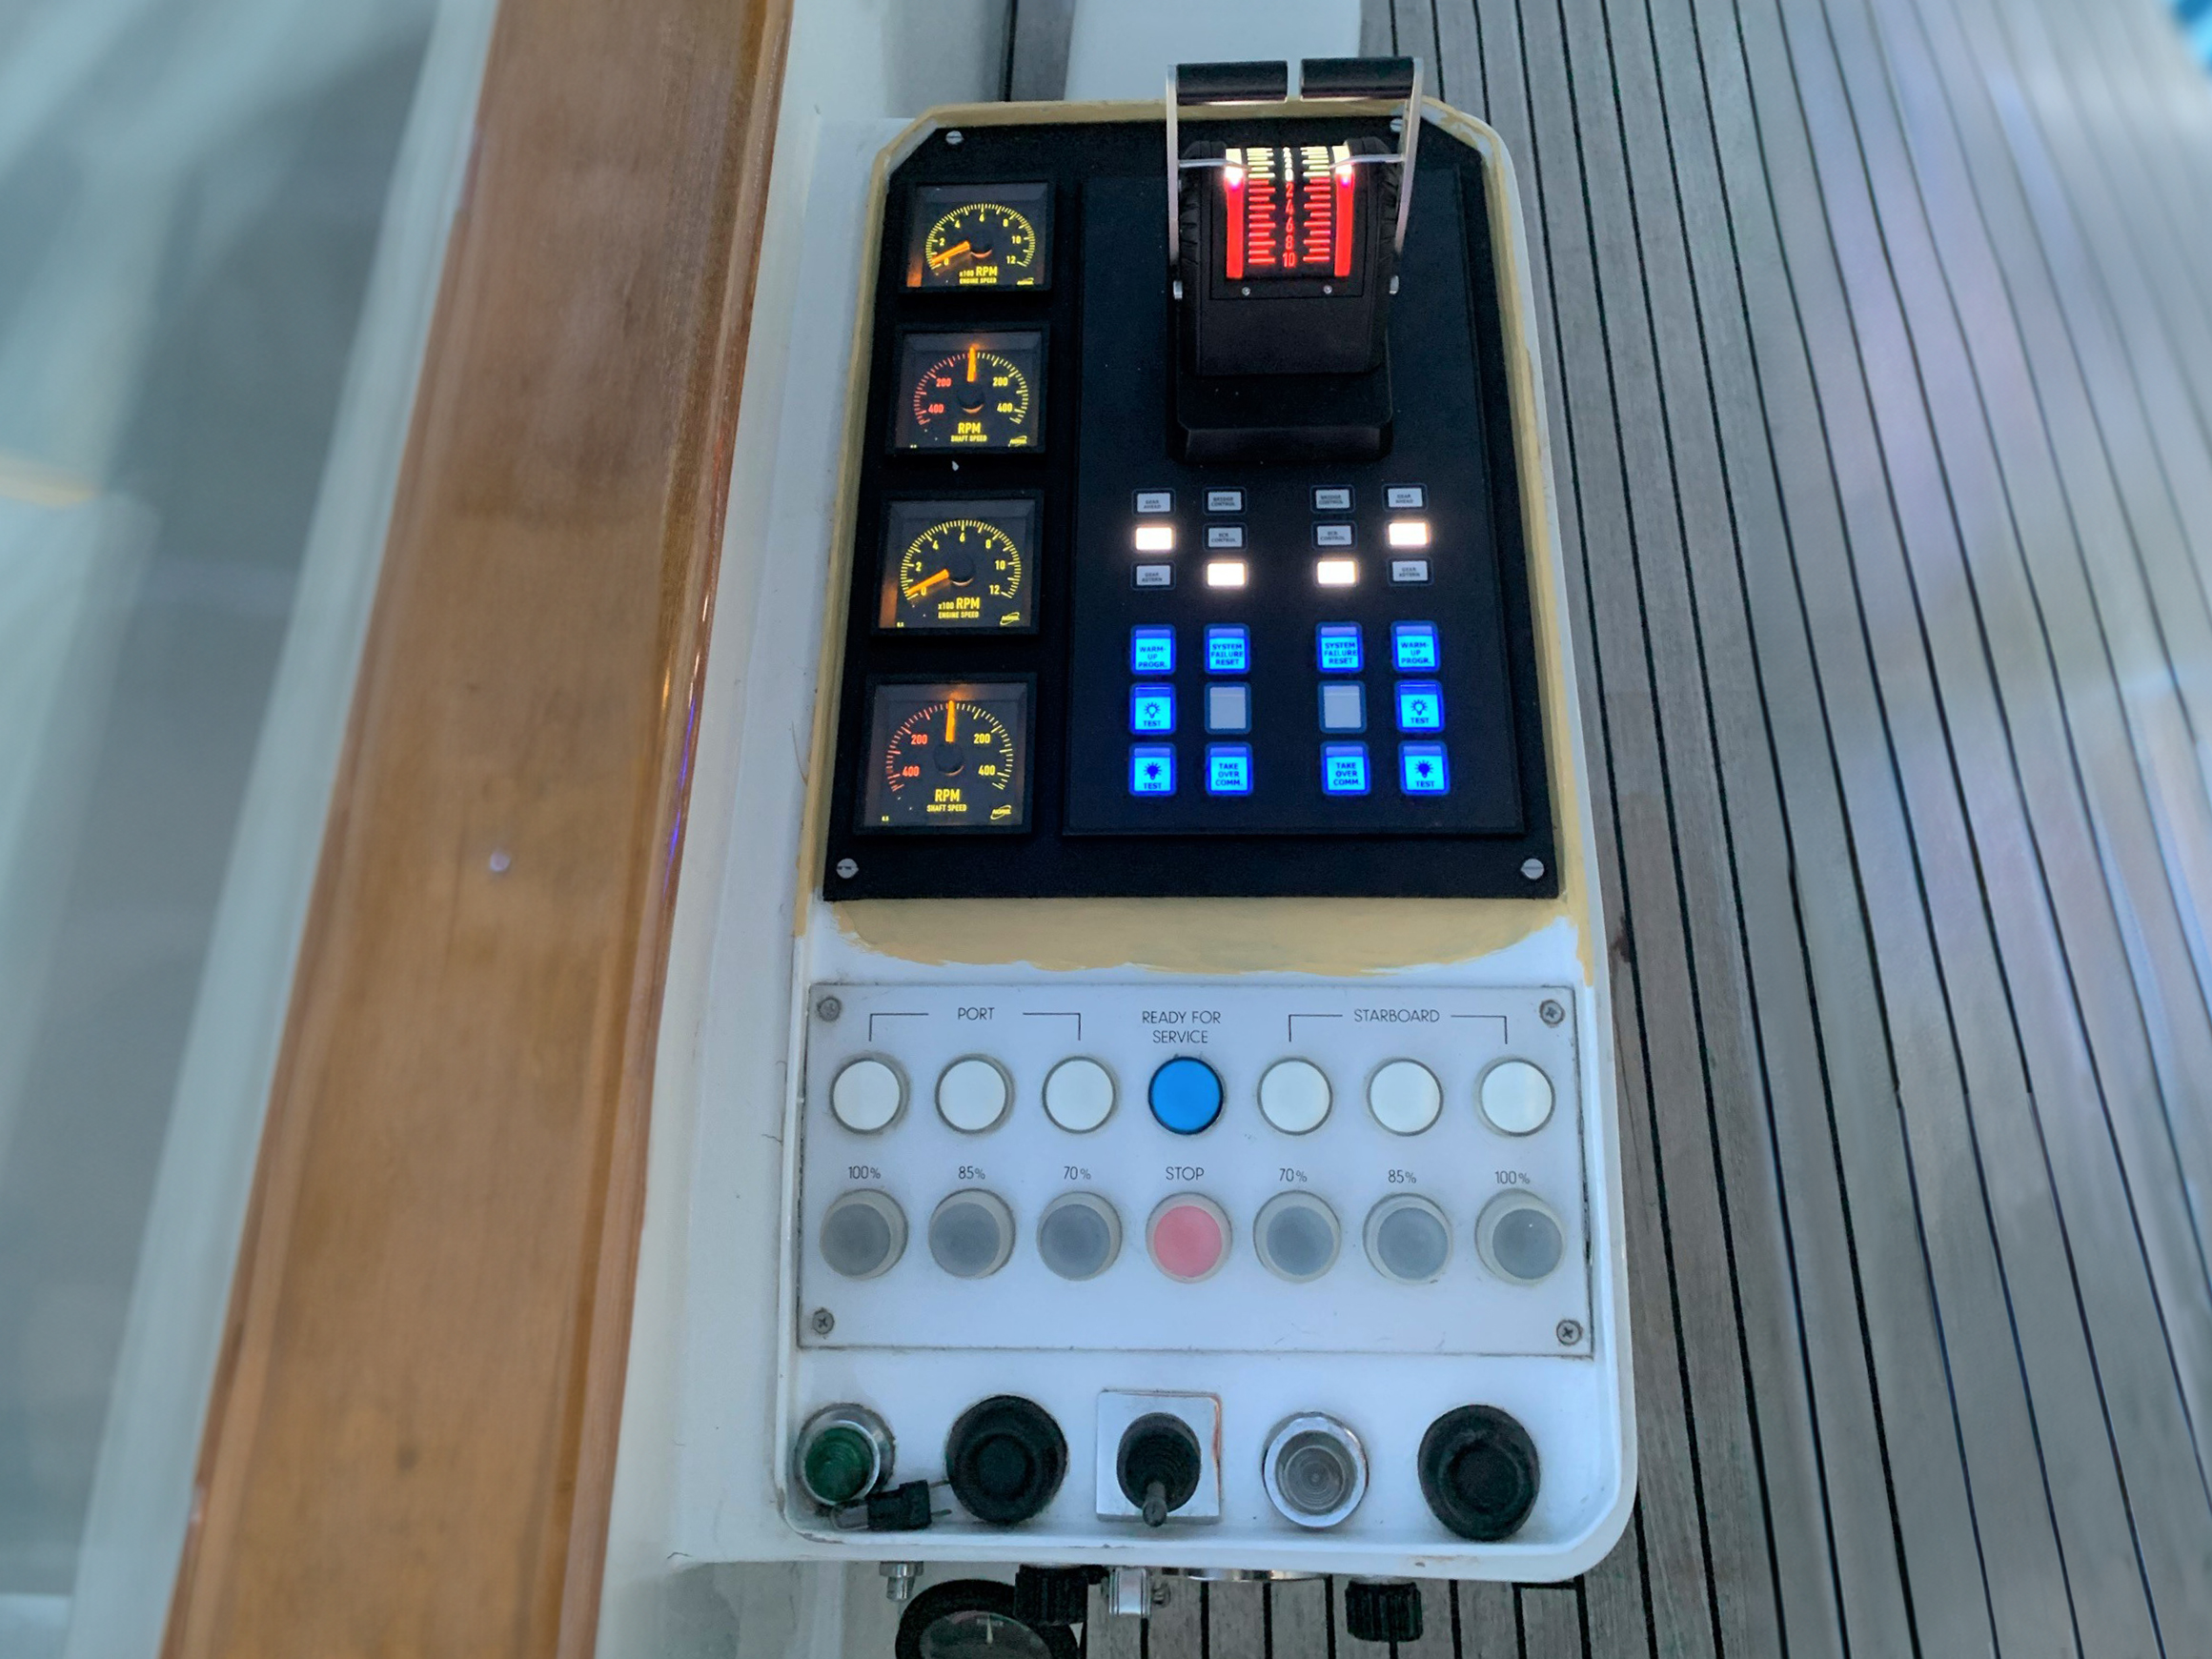 The image shows the refit solution of a megayacht propulsion control system - new outside control lever panel